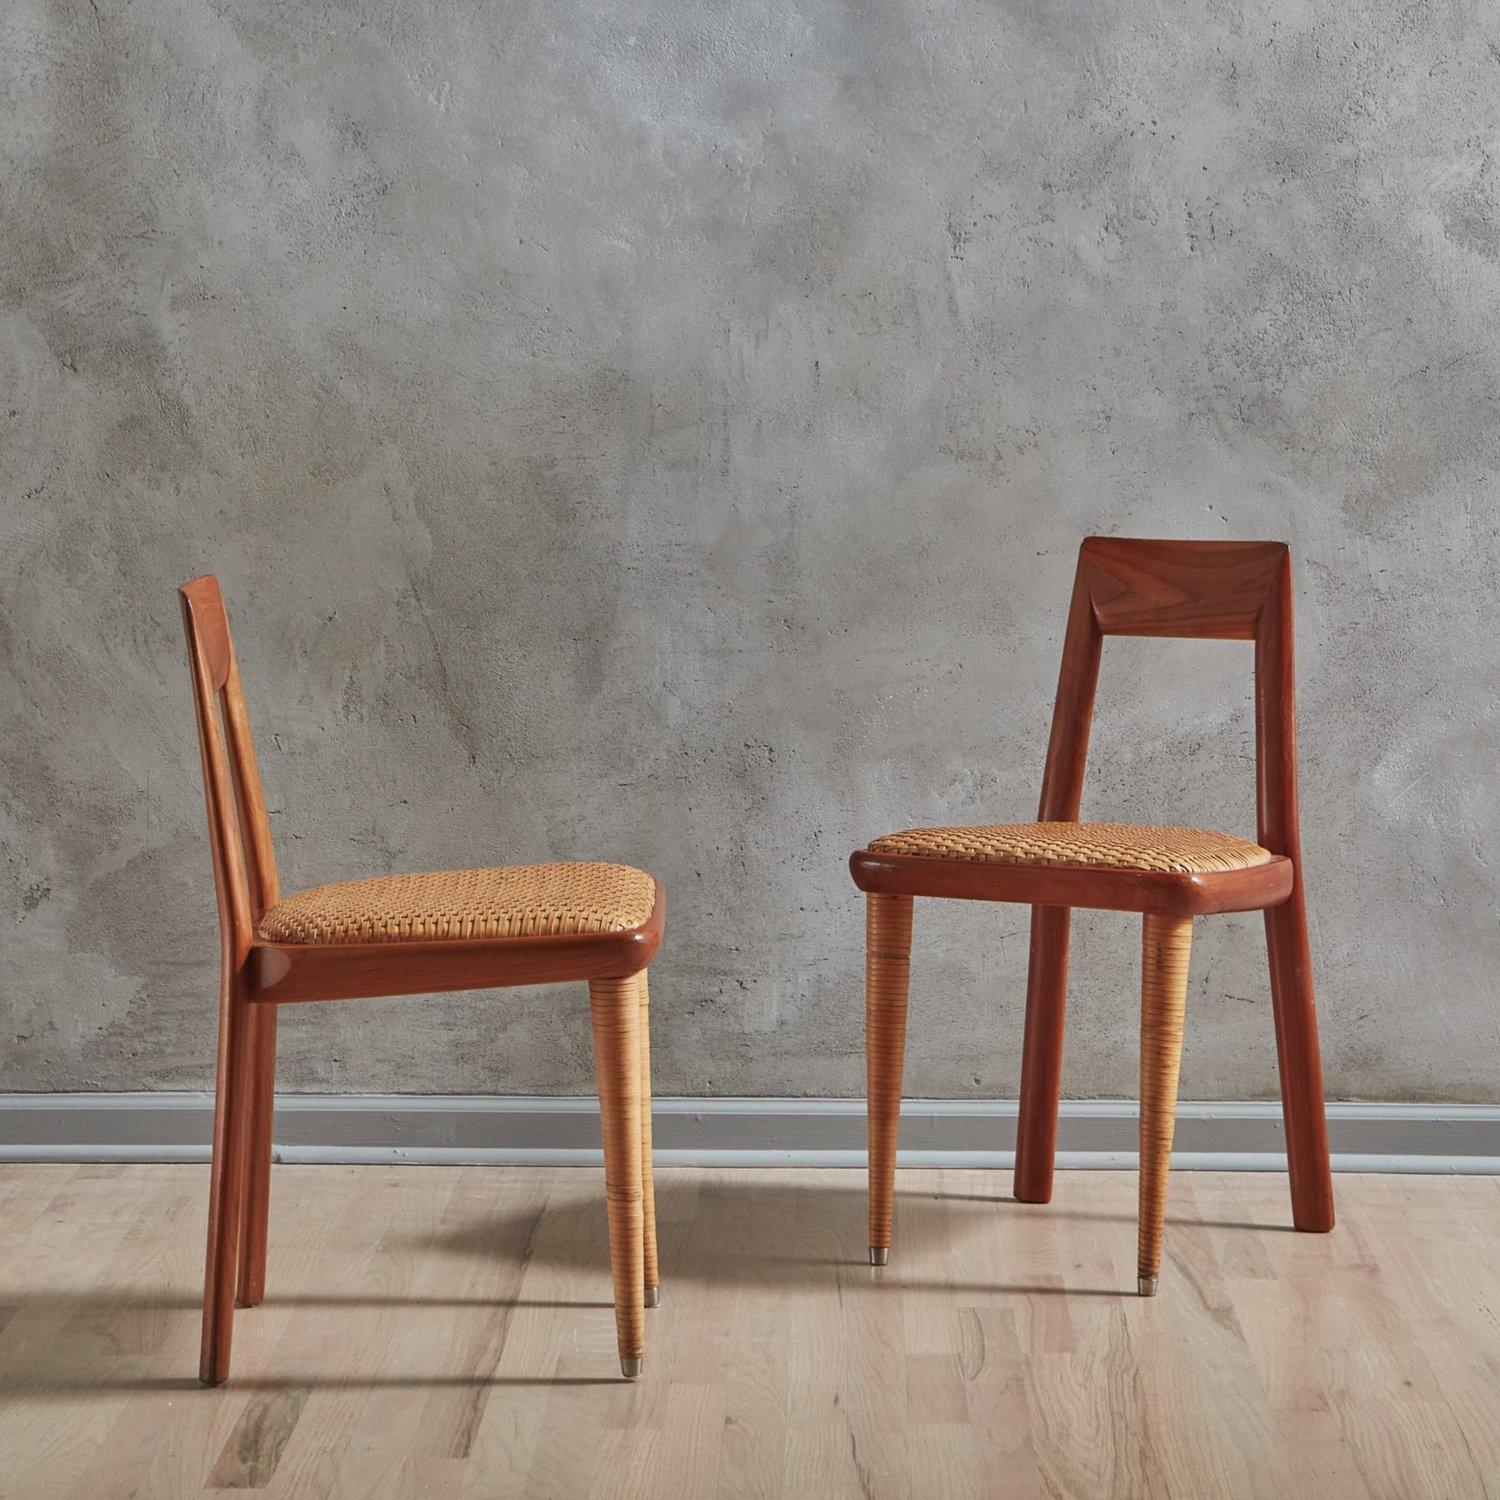 A set of 8 Mid Century Italian dining chairs by Pierantonio Bonacina. These chairs feature angular wood frames with beautiful graining and open seat backs. They have woven leather seats and tapered front legs, which are wrapped in coordinating